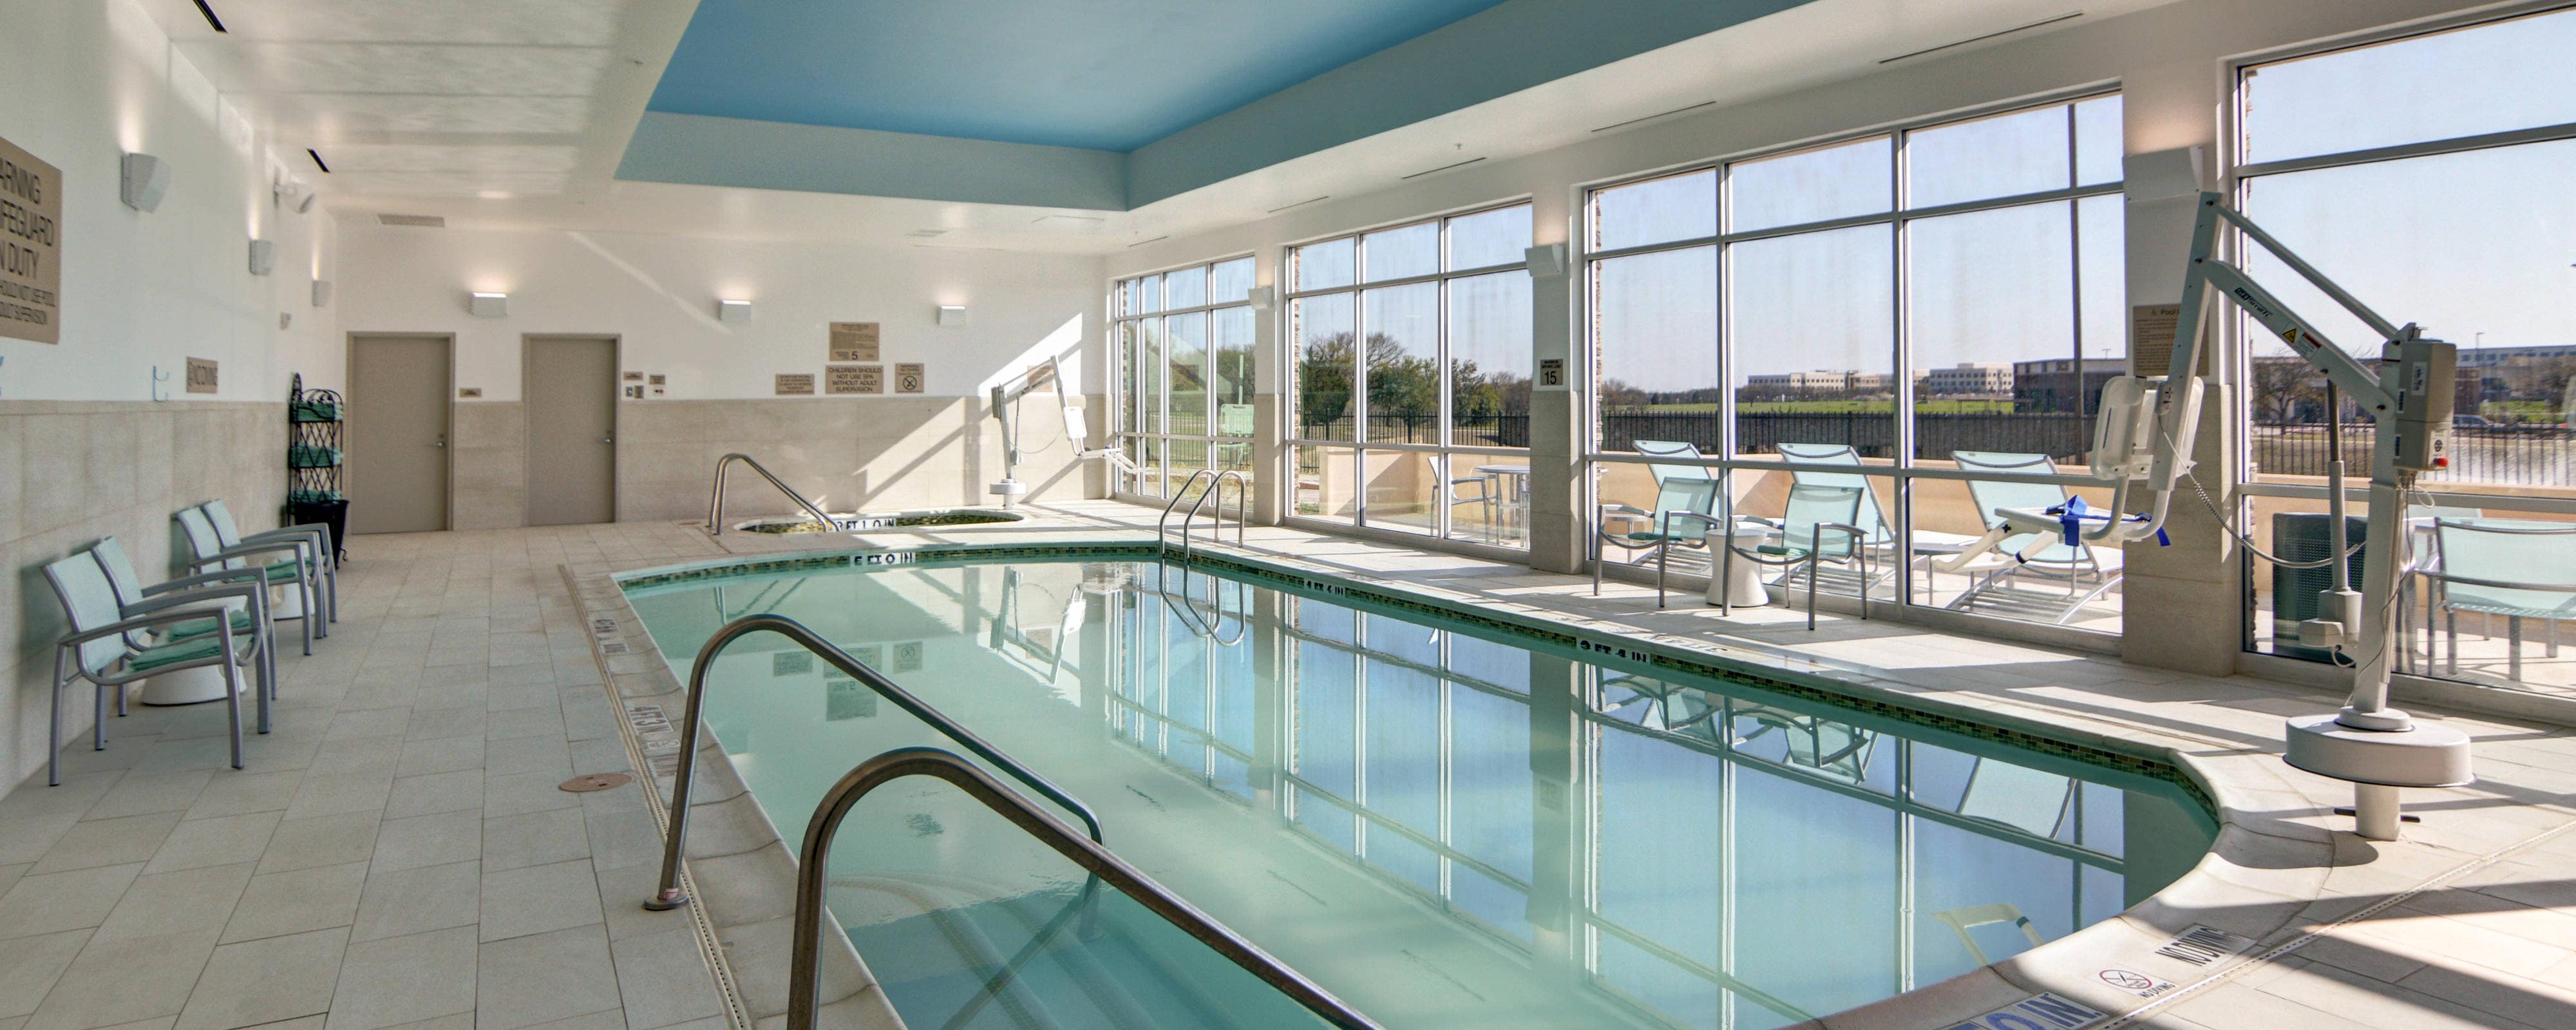 Hotels With Indoor Pools In Dallas Tx